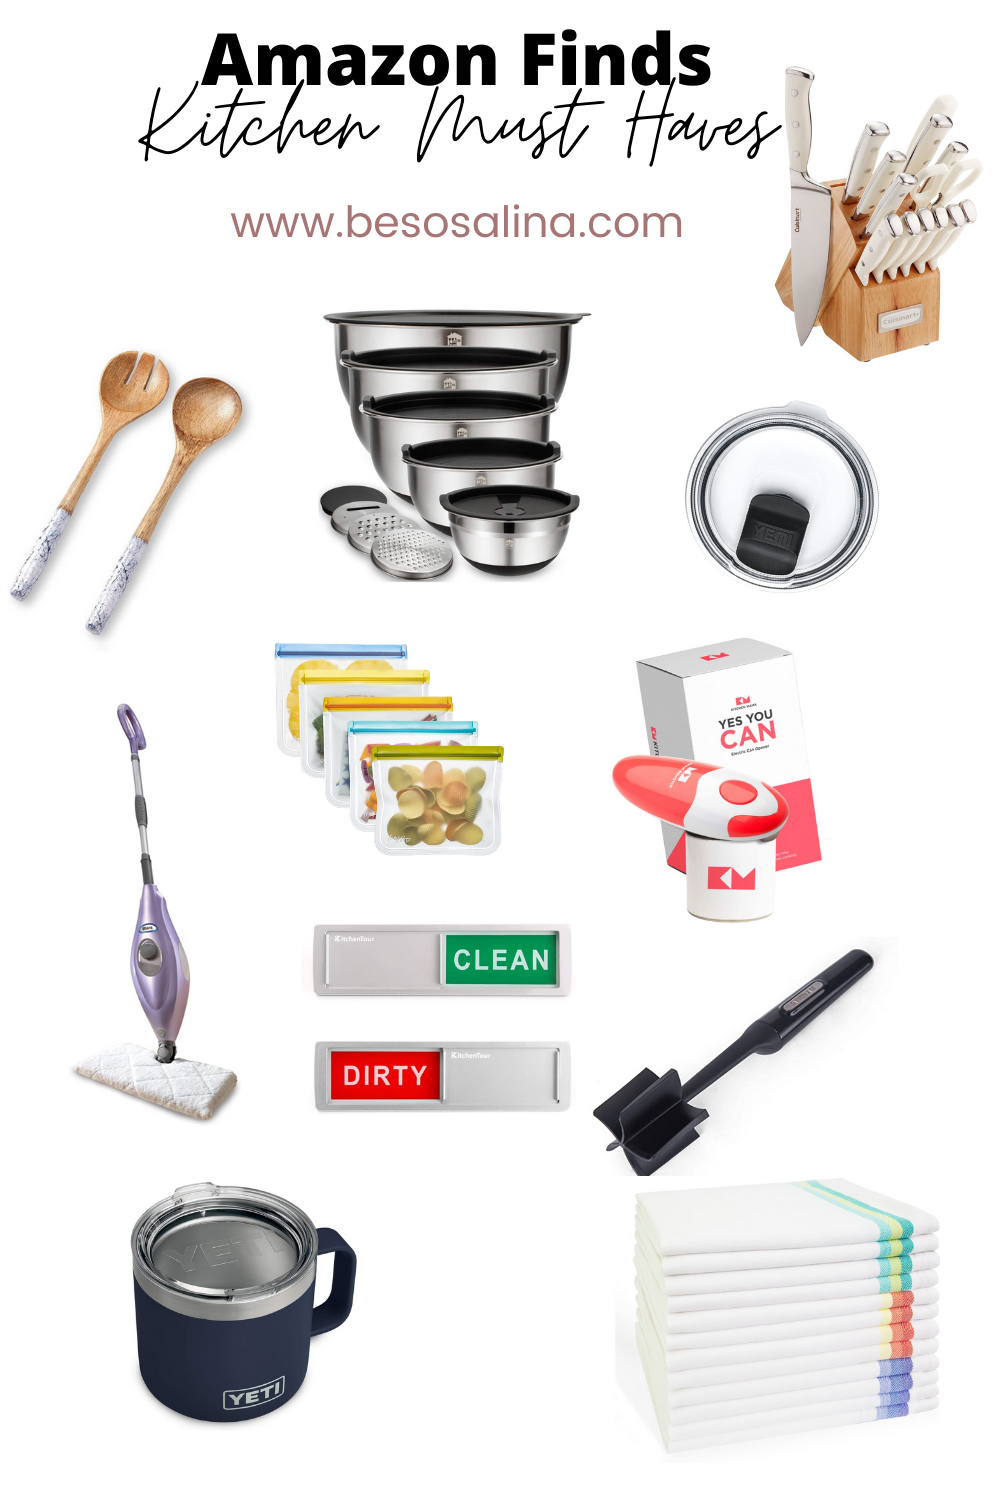 Mom Must-Haves :: July 2017 Kitchen Tools